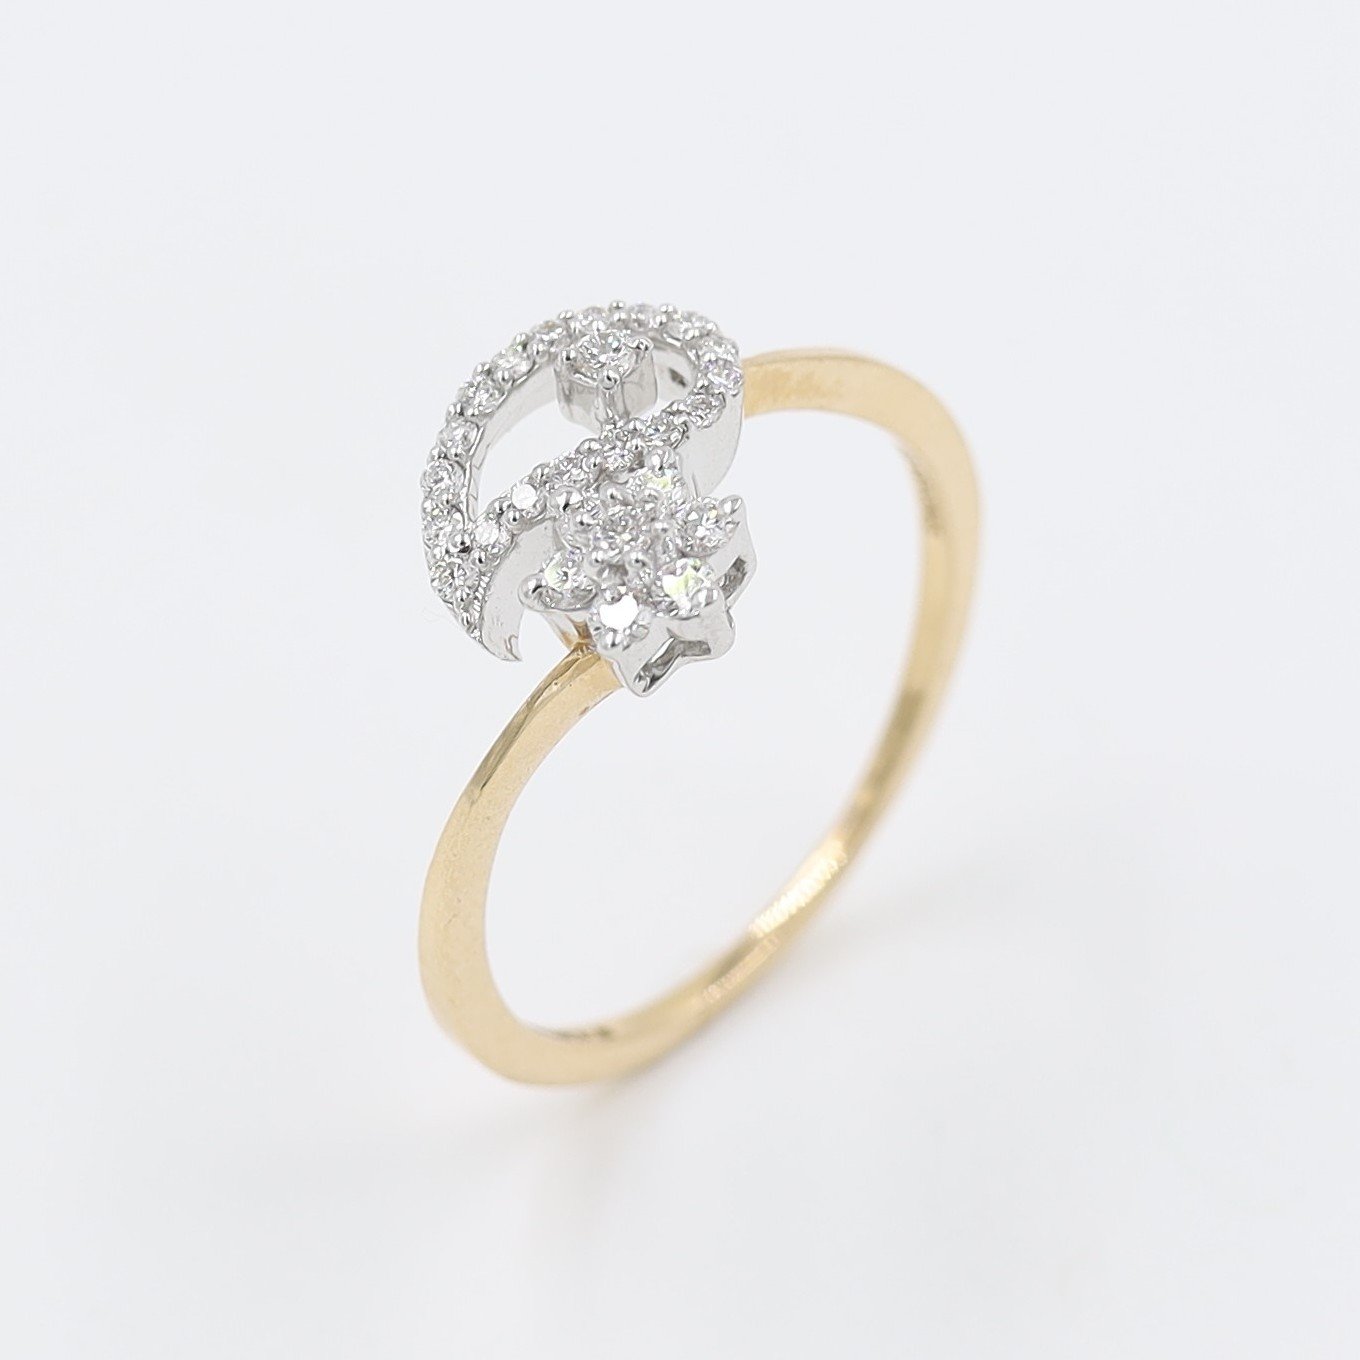 50 Beautiful Engagement Rings From Real Brides